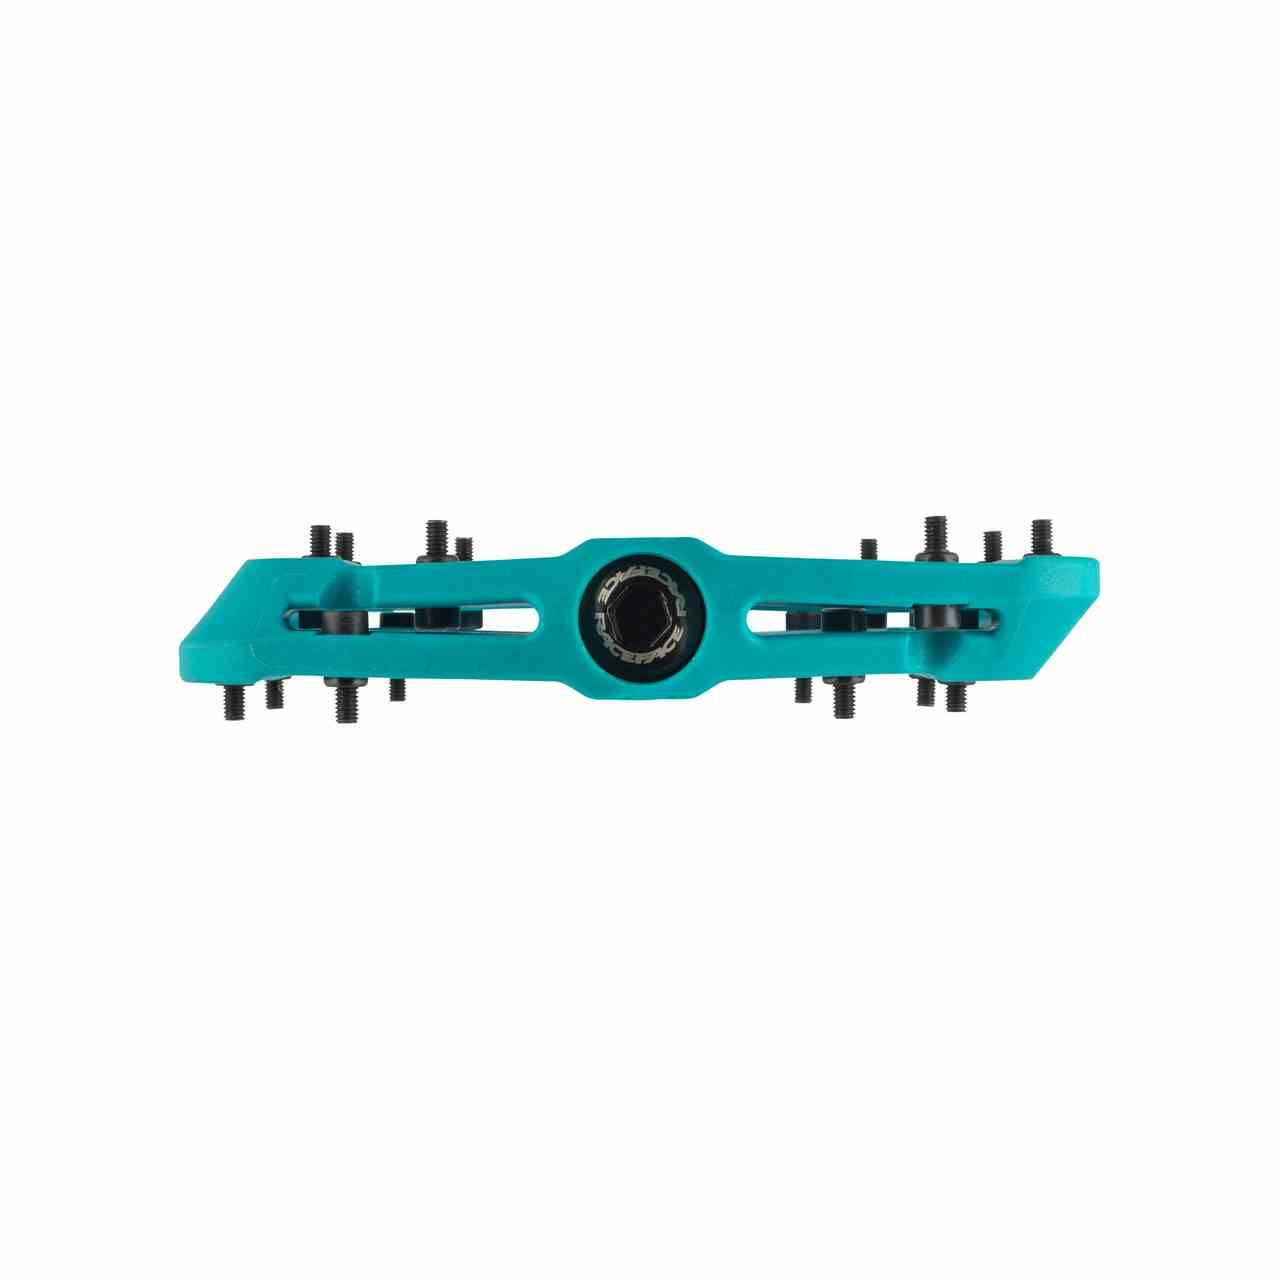 Chester Pedals Turquoise